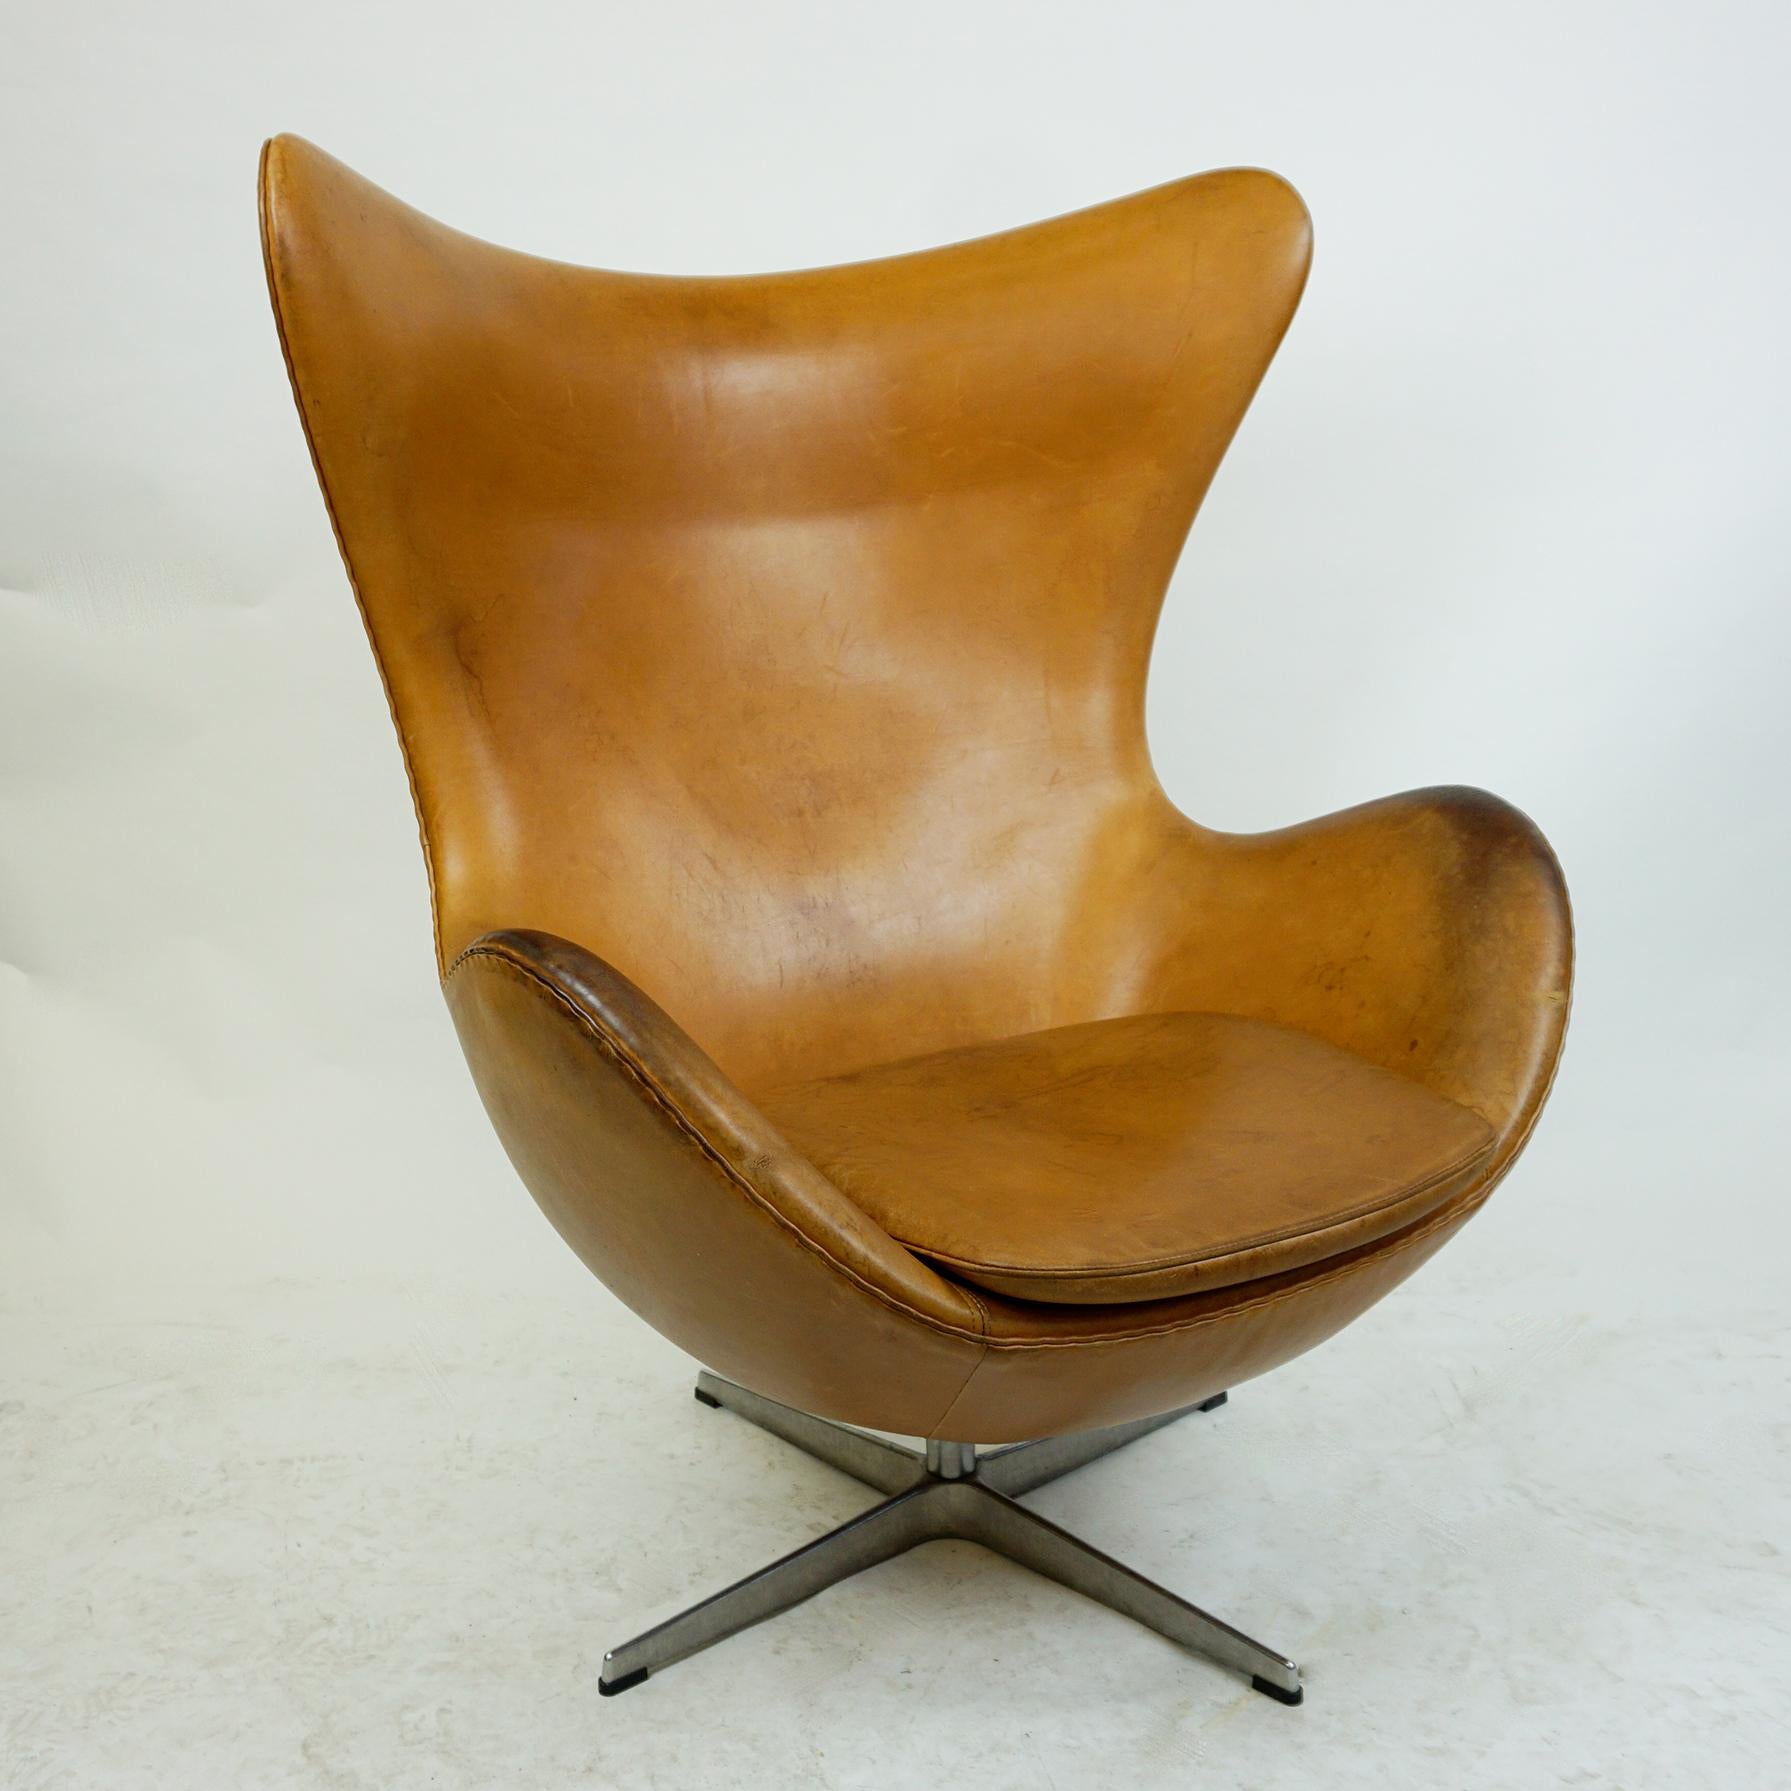 This iconic swivelling lounge chair was designed by Arne Jacobsen 1958 for the SAS Royal Copenhagen Hotel in Denmark and is one of the most famous chairs in the world recognized by design lovers in all countries as the Egg chair.
It is the